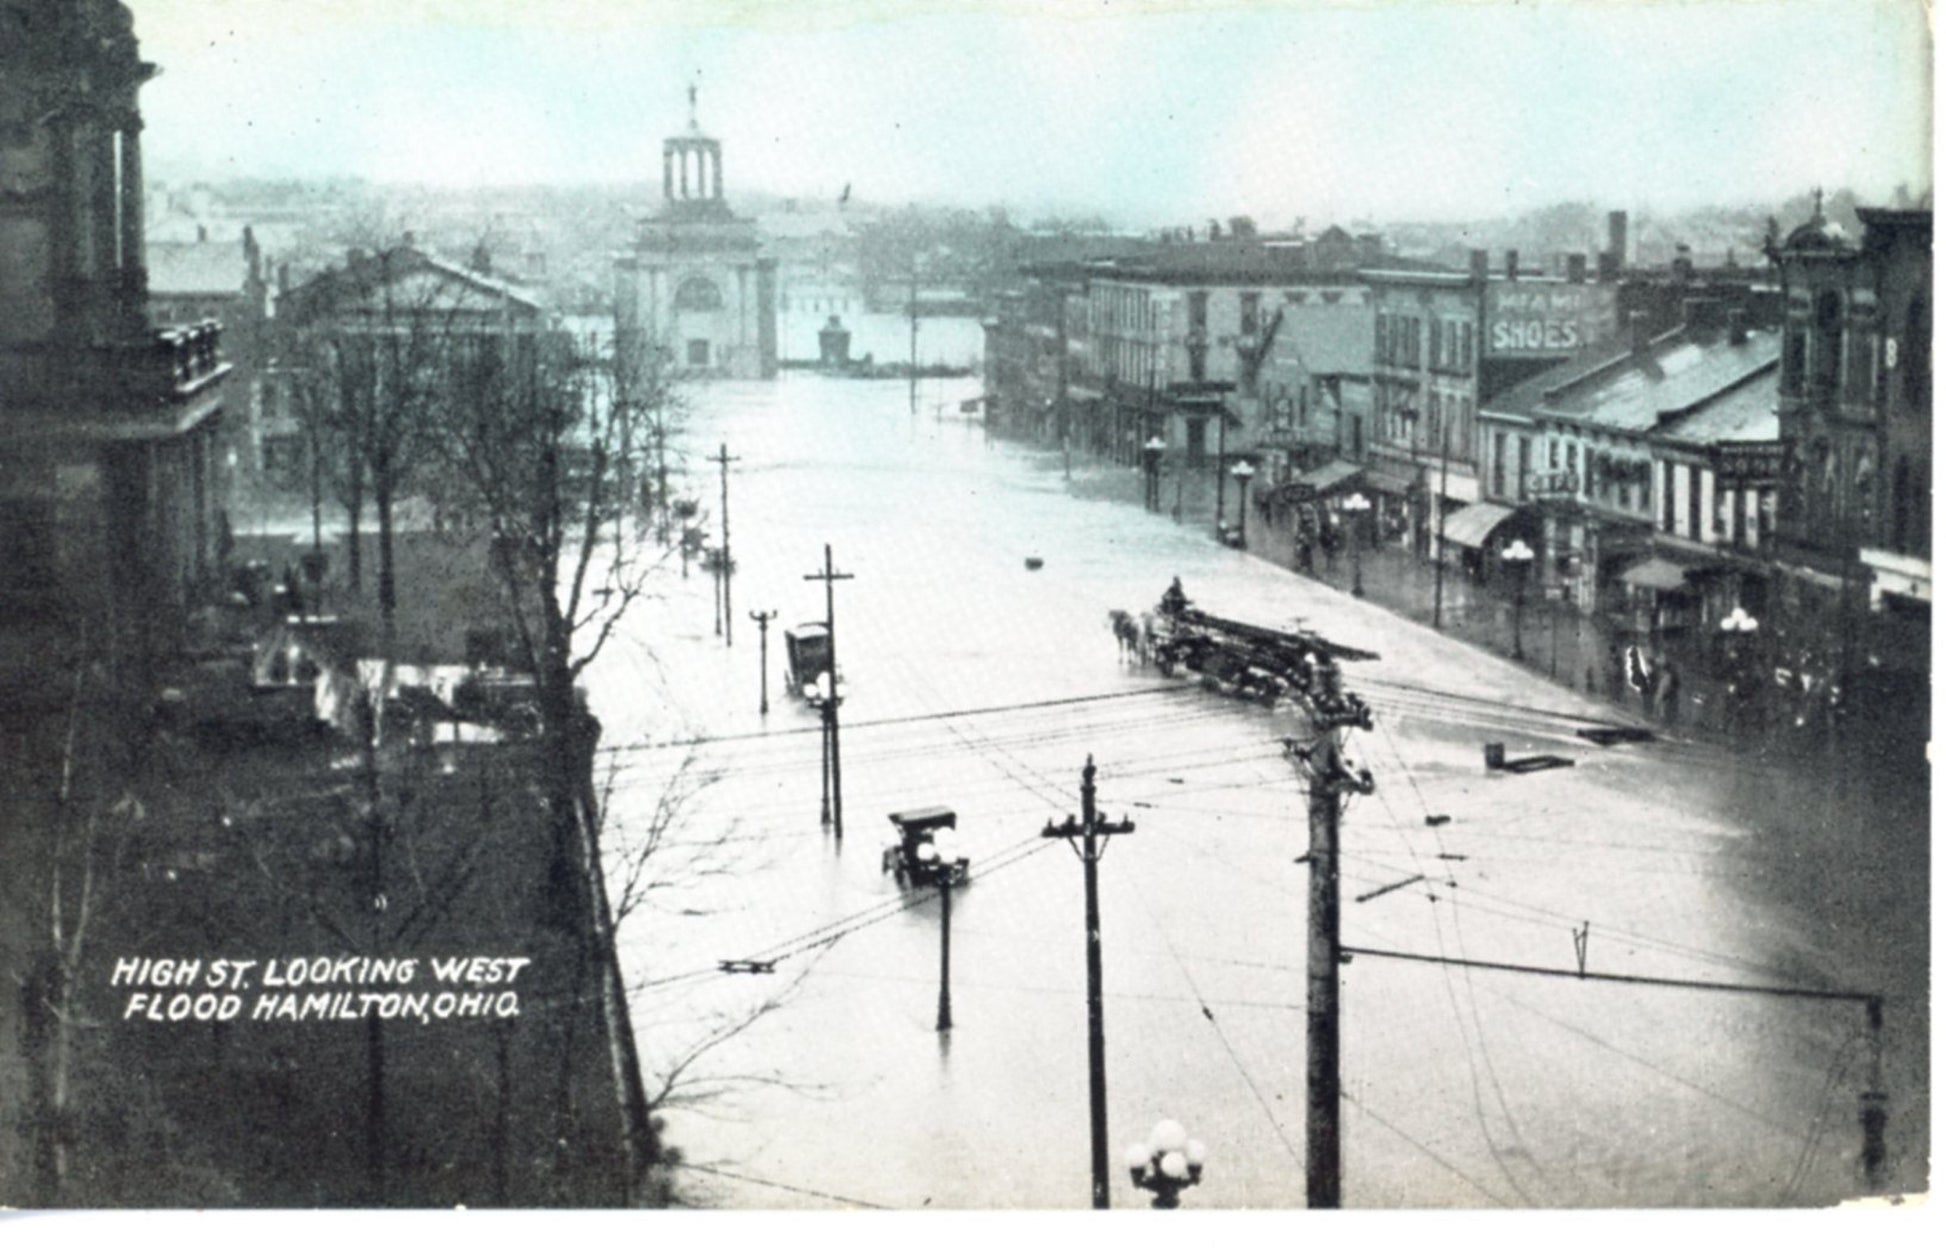 Flood Damage "High Street Looking West" Great Flood Disaster of 1913 HAMILTON OHIO Antique Real Photo Postcard